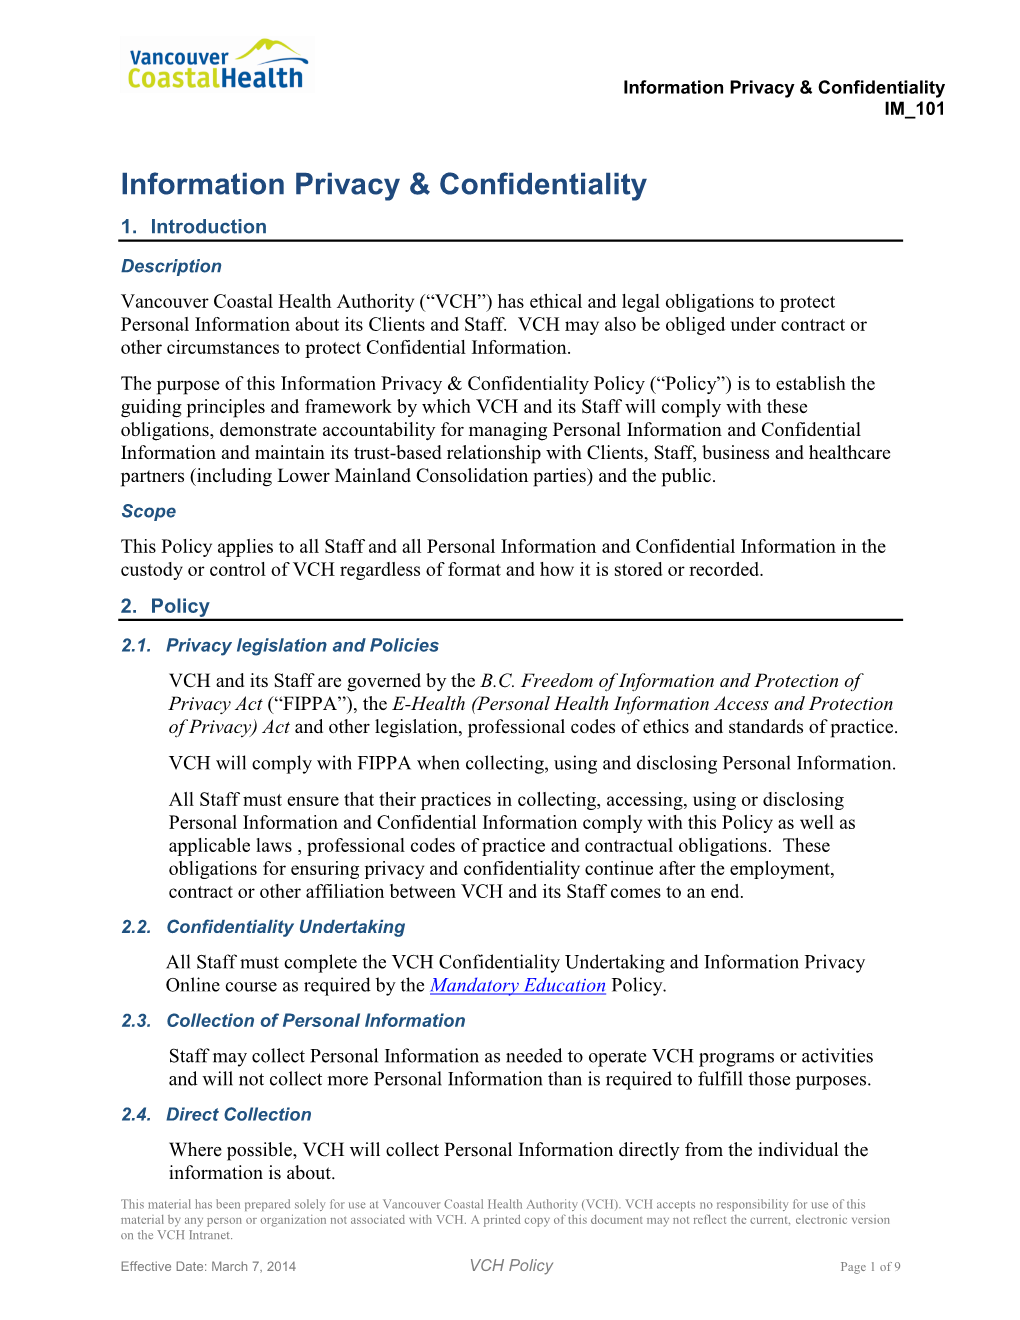 Information Privacy and Confidentiality